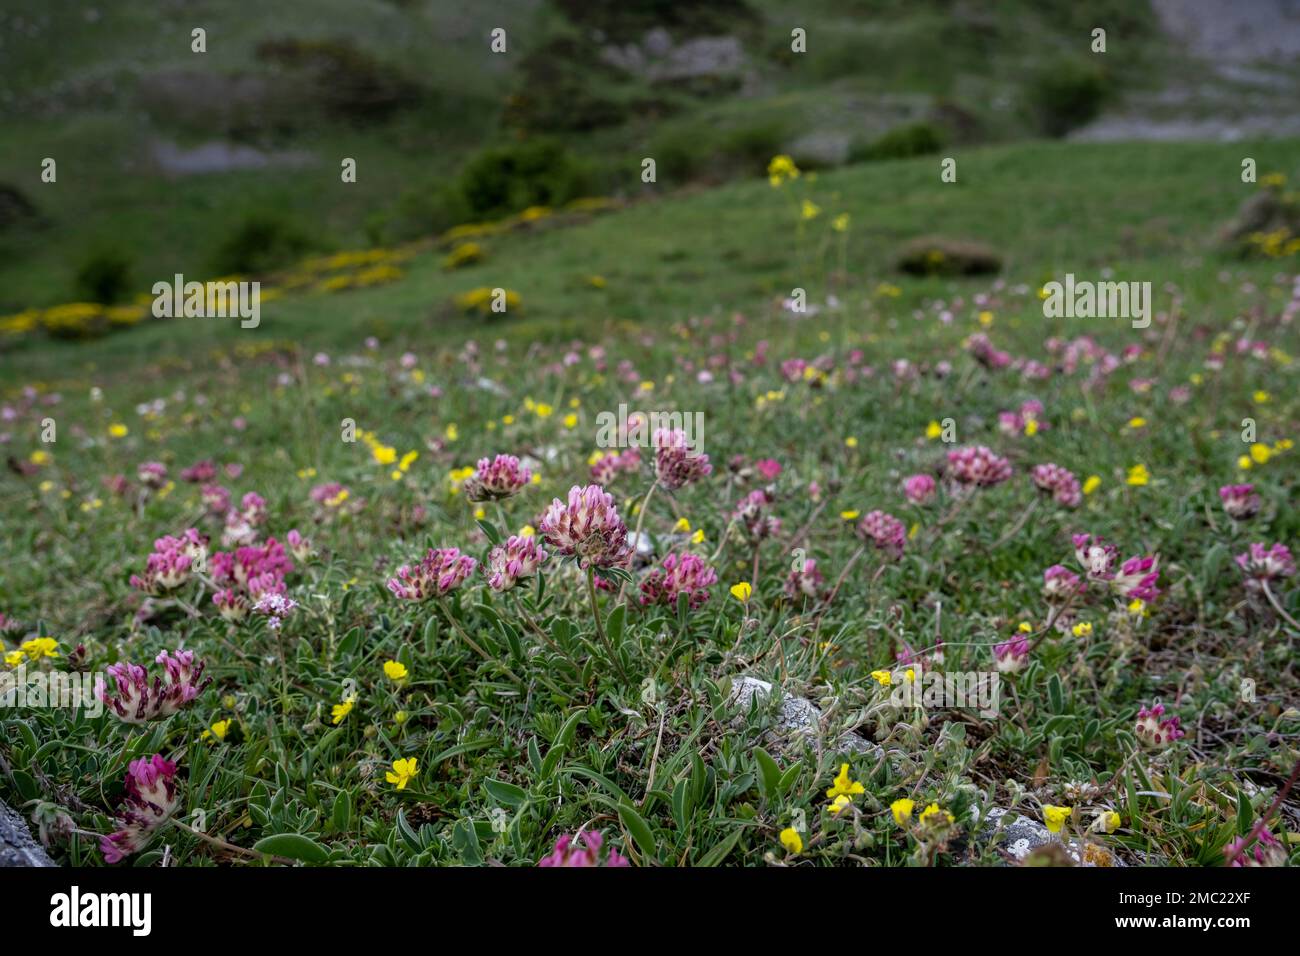 Kidney vetch or woundwort pink wild flowers blooming in spring Stock Photo